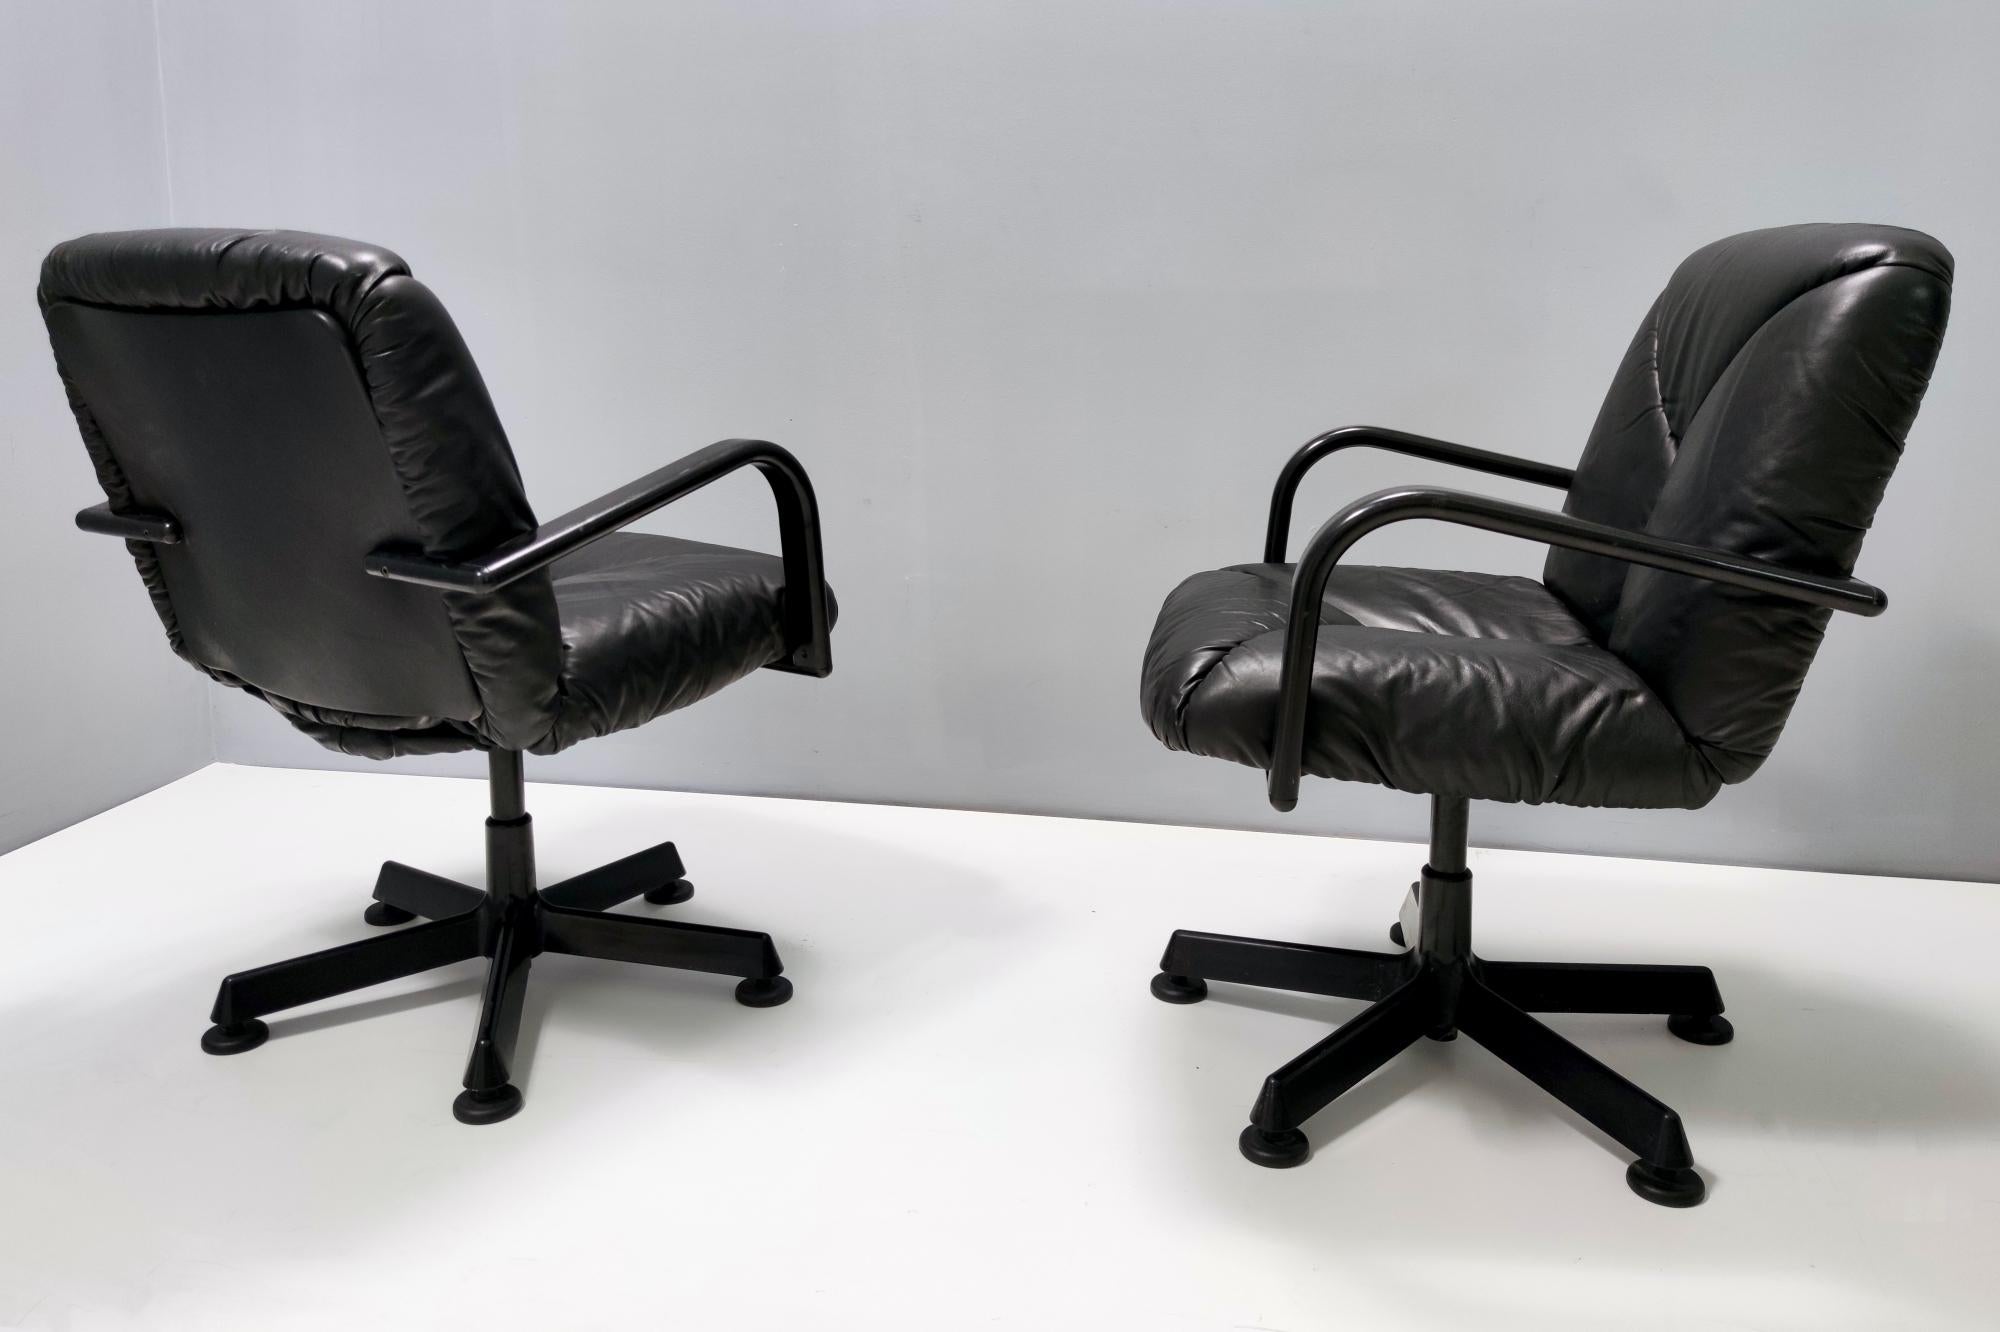 Late 20th Century Postmodern Black Leather Office Chair by Vico Magistretti for ICF Design, 1978 For Sale